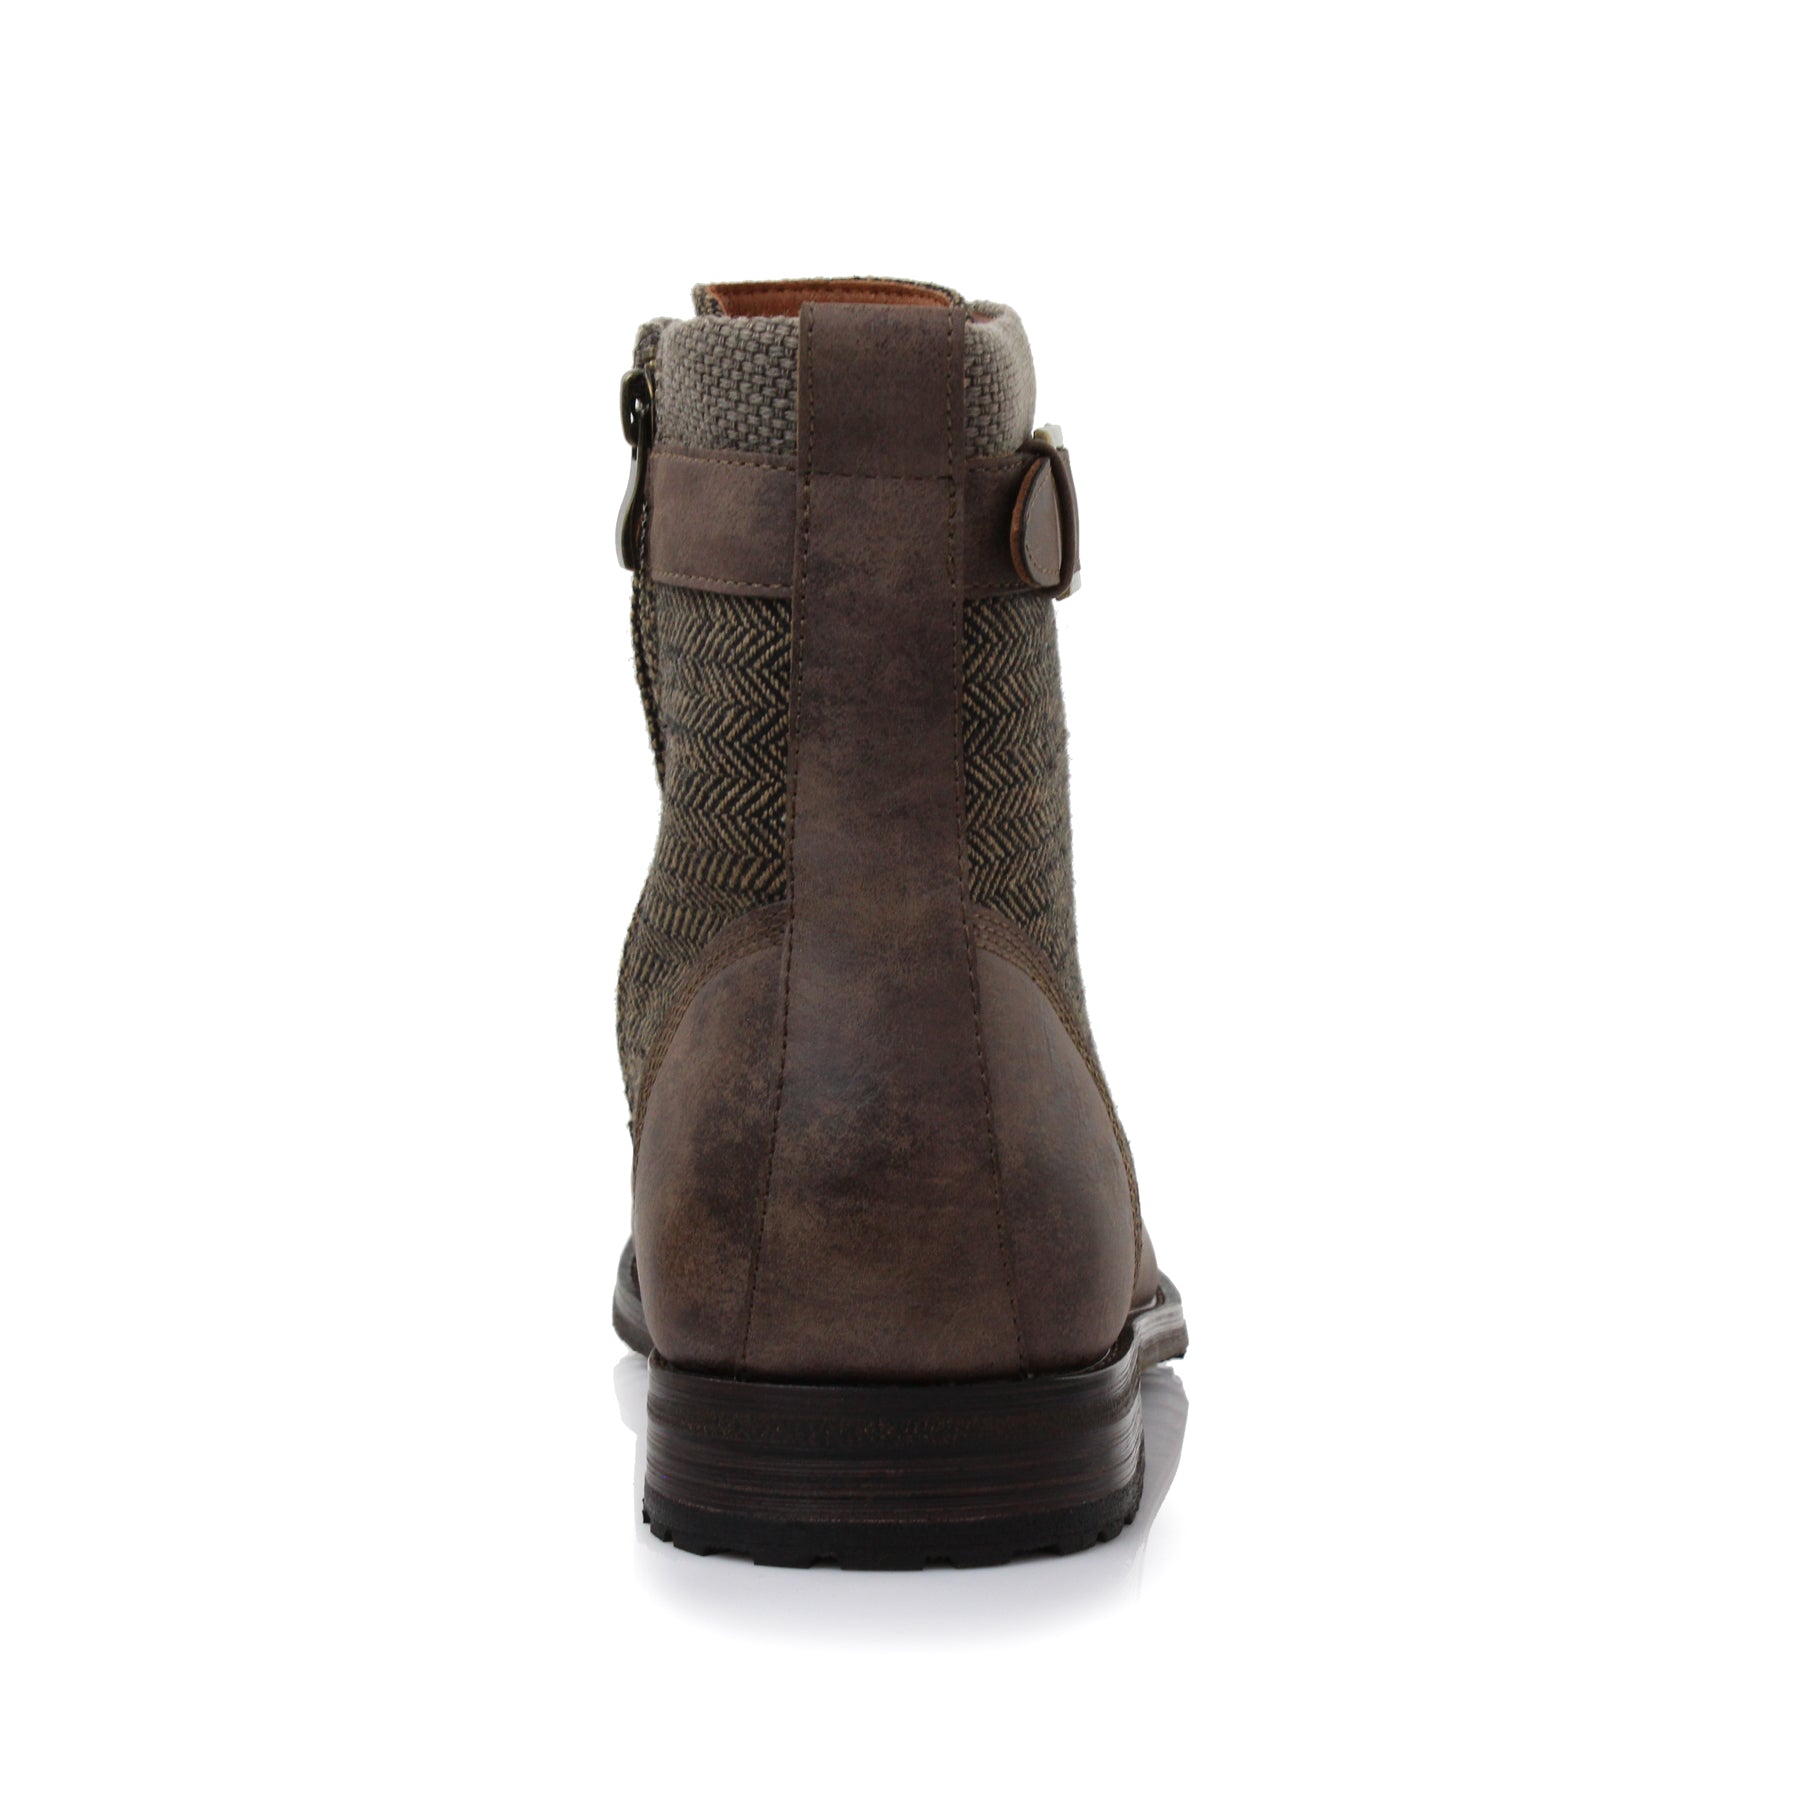 Rugged Duo-Textured Boots | Elijah by Polar Fox | Conal Footwear | Back Angle View